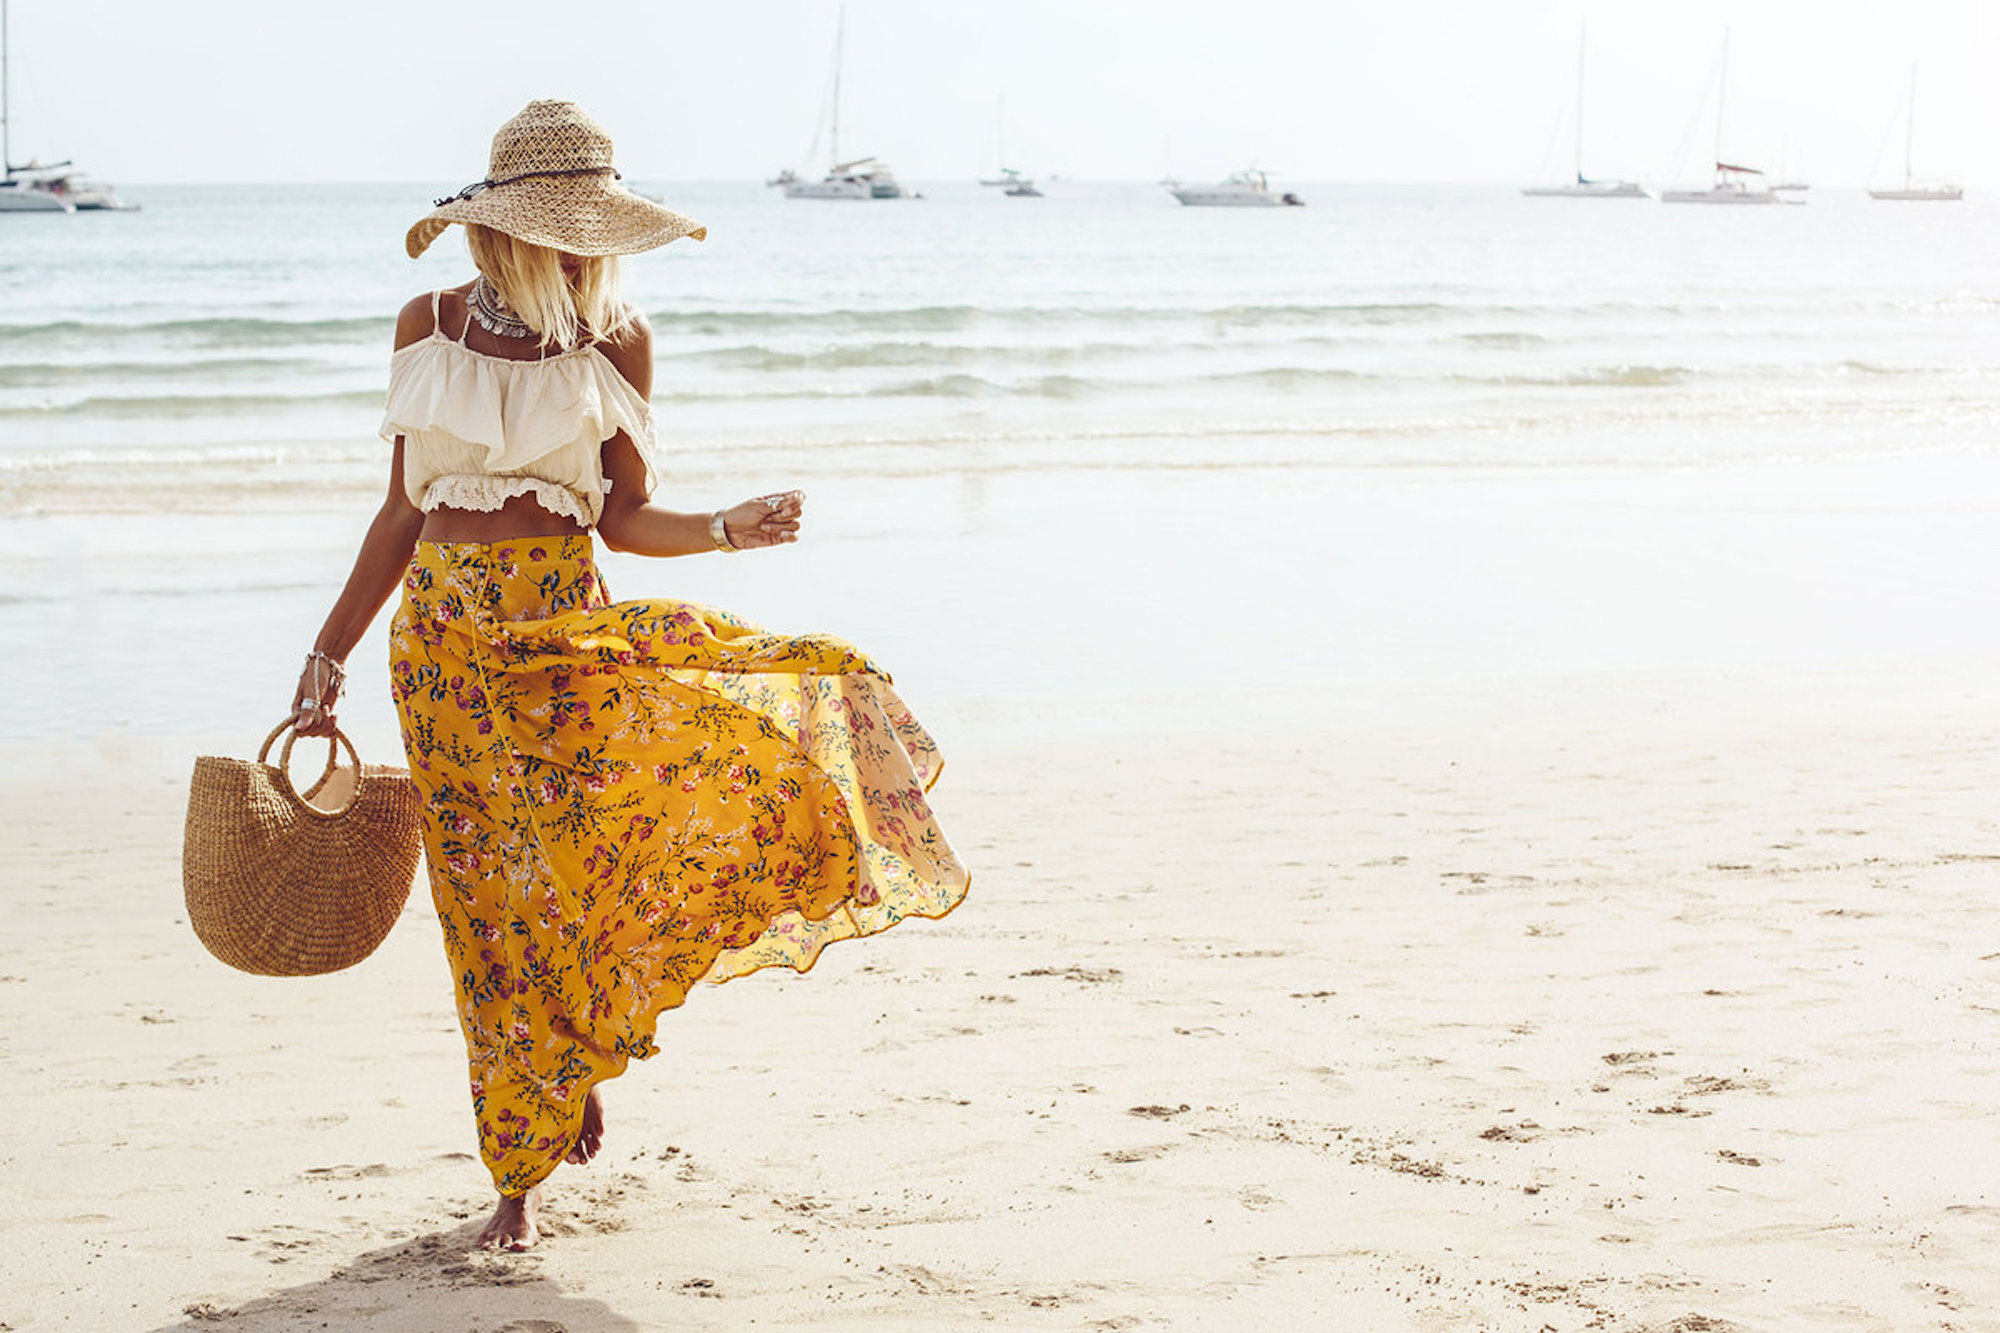 This Maxi Skirt Is Perfect for Summer Travel